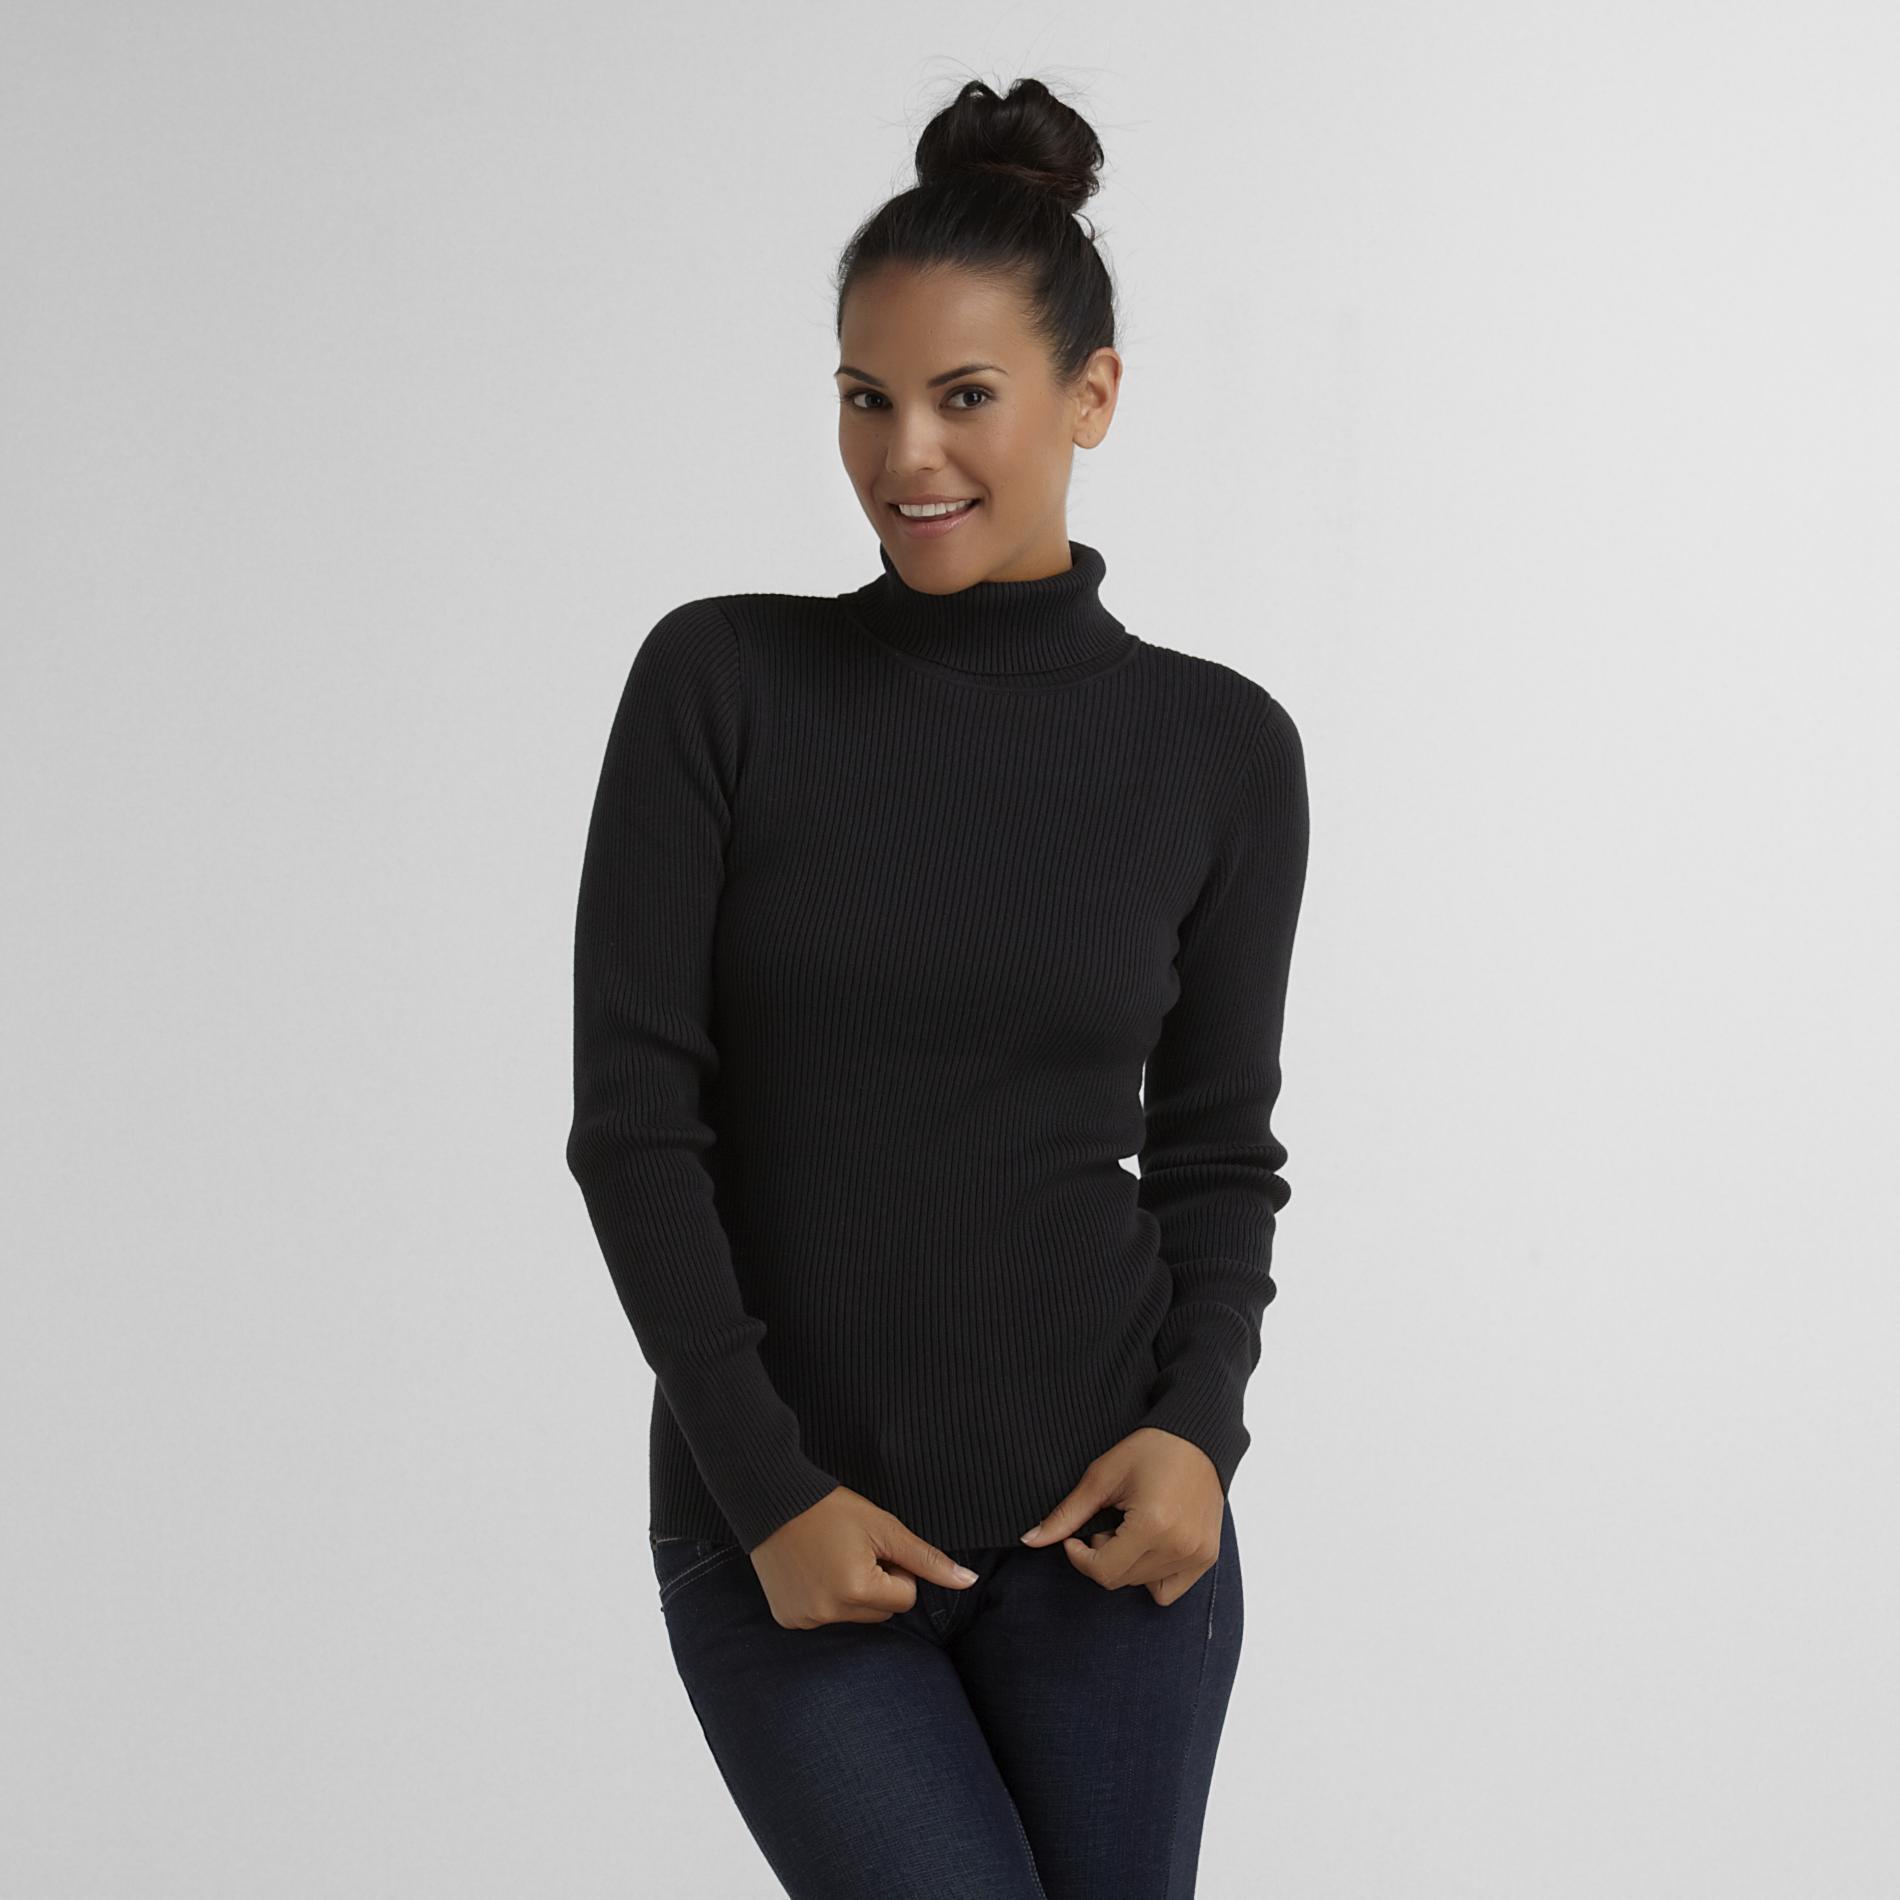 Basic Editions Women's Ribbed Knit Turtleneck